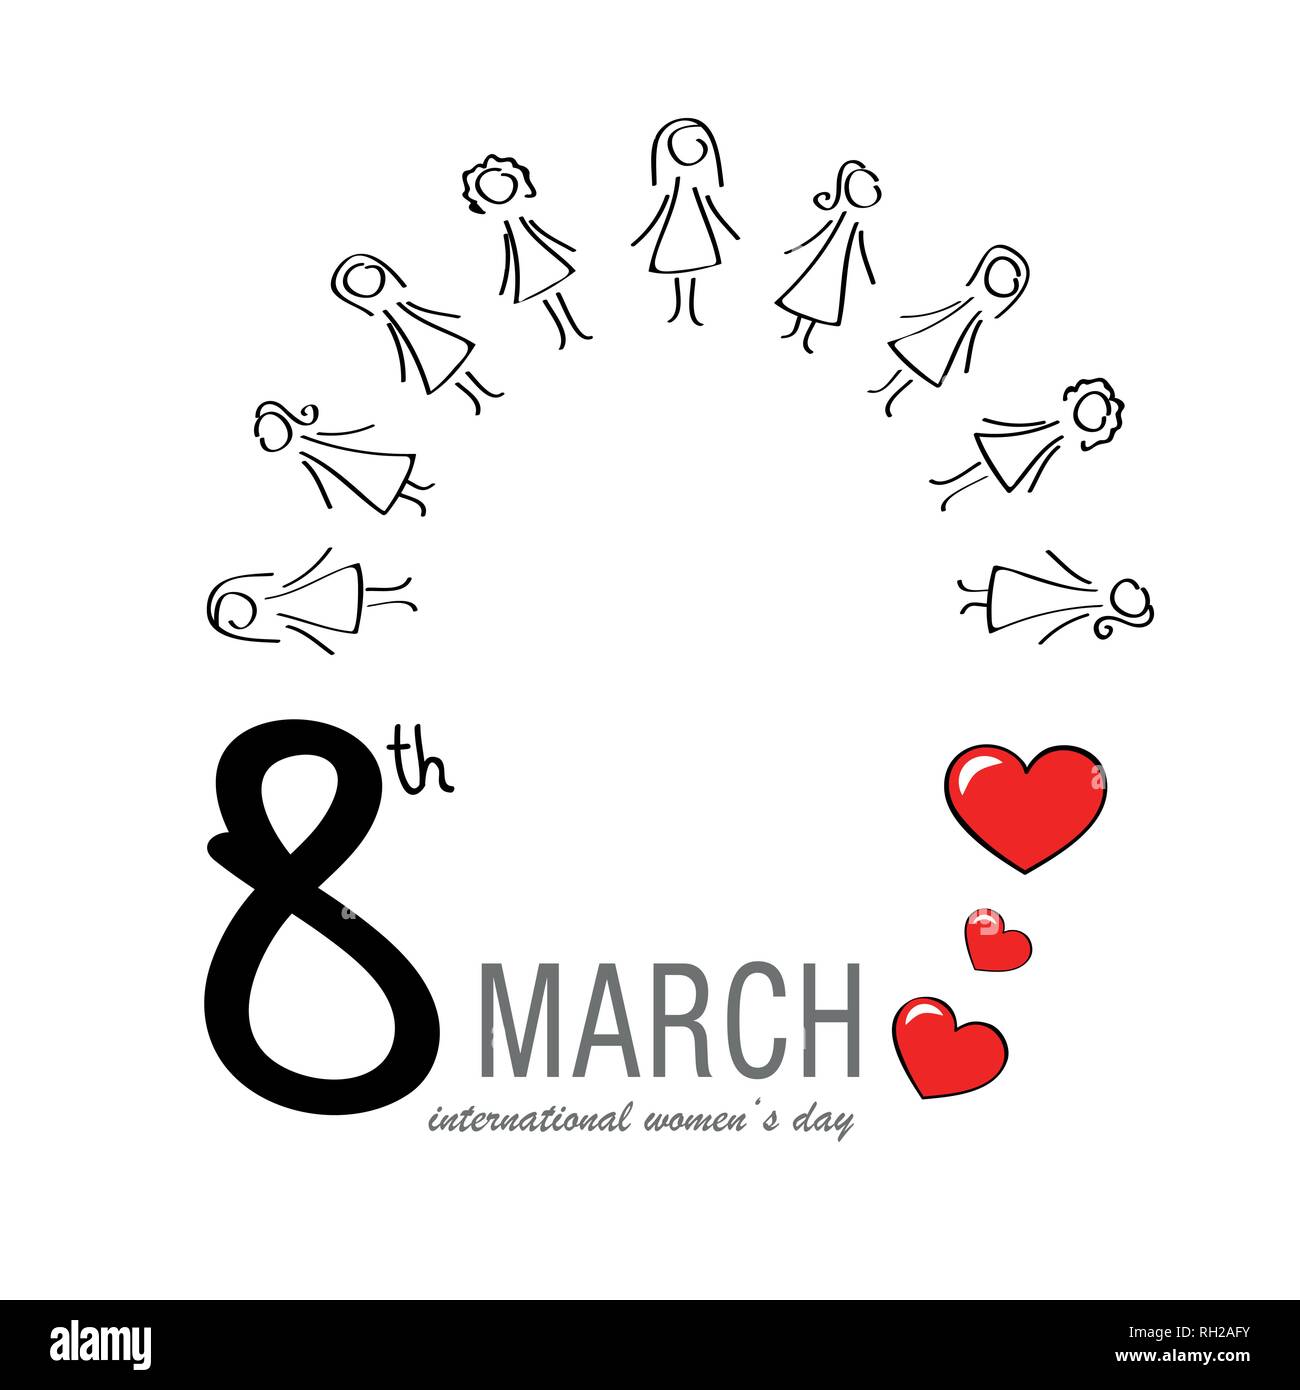 international women's day 8th march womans group and red hearts vector illustration EPS10 Stock Vector